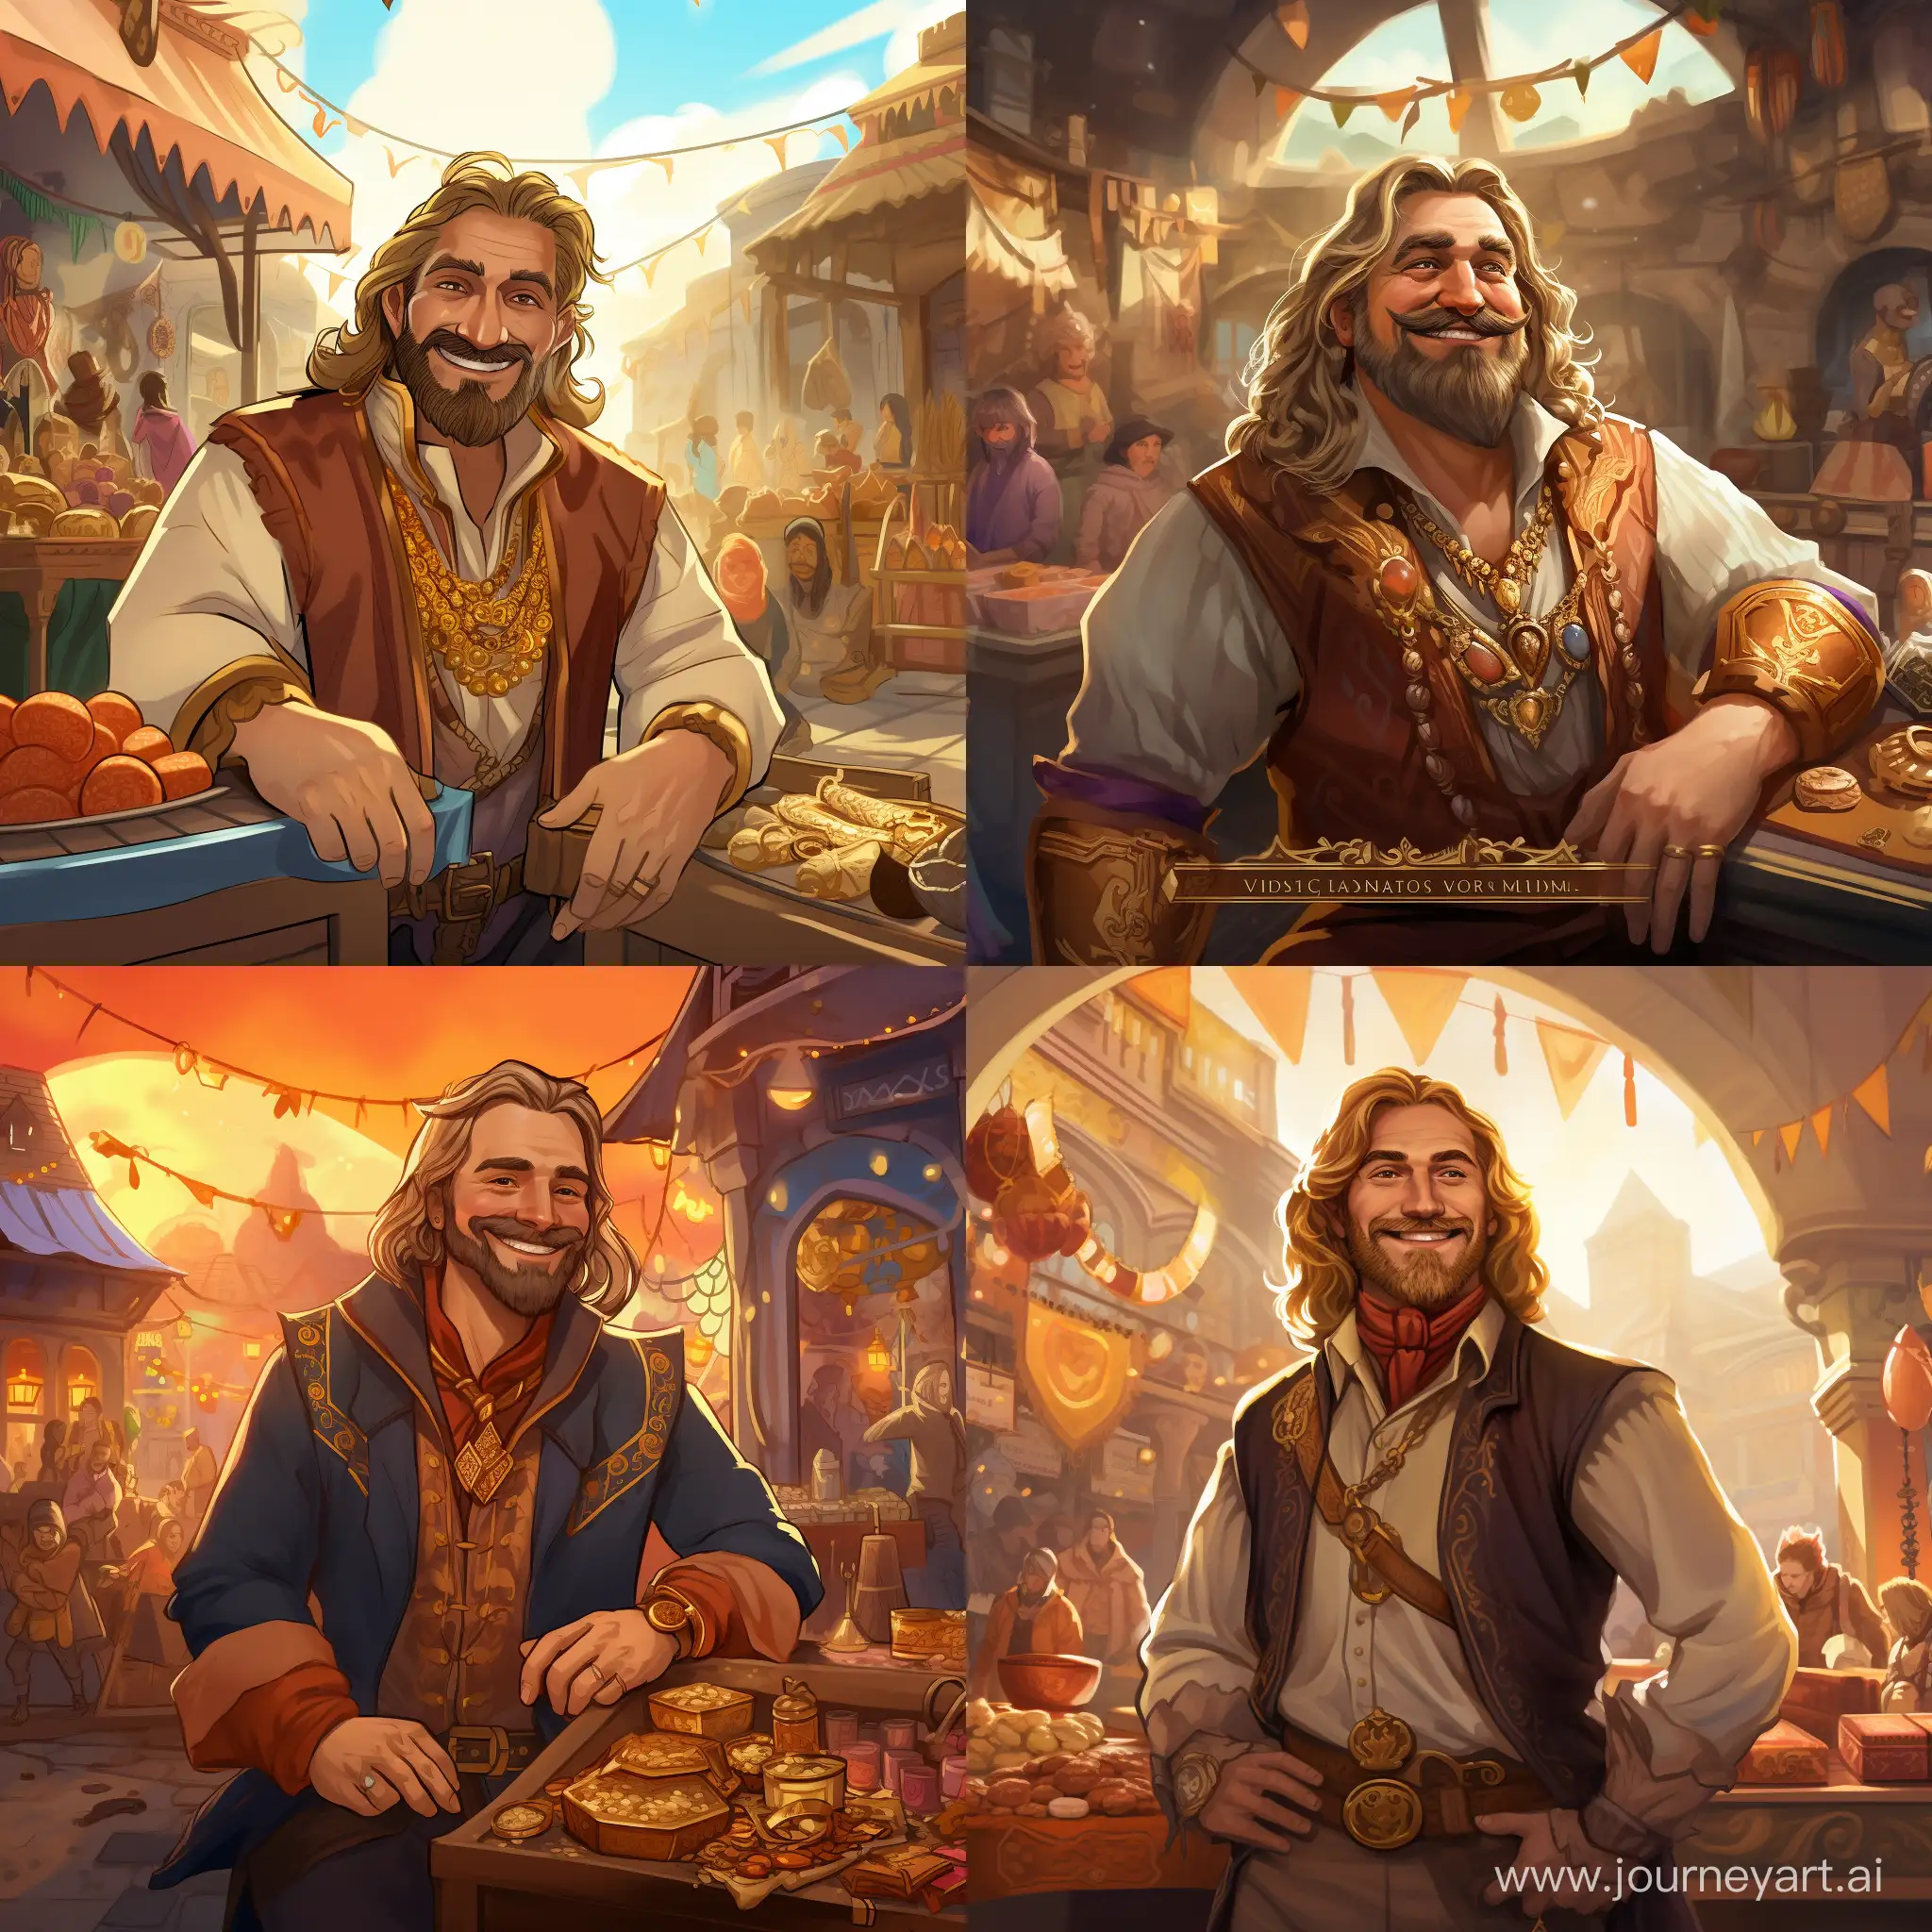 Draw me a concept art of a Viking trader who has long blond hair and a long beard with a mustache. 
He is 35 years old and looks young. Almost every finger has a ring with a precious stone. He is dressed in expensive clothes and wears gold rings with stones. Smiling. In the background there is a market where people reach for it with their hands